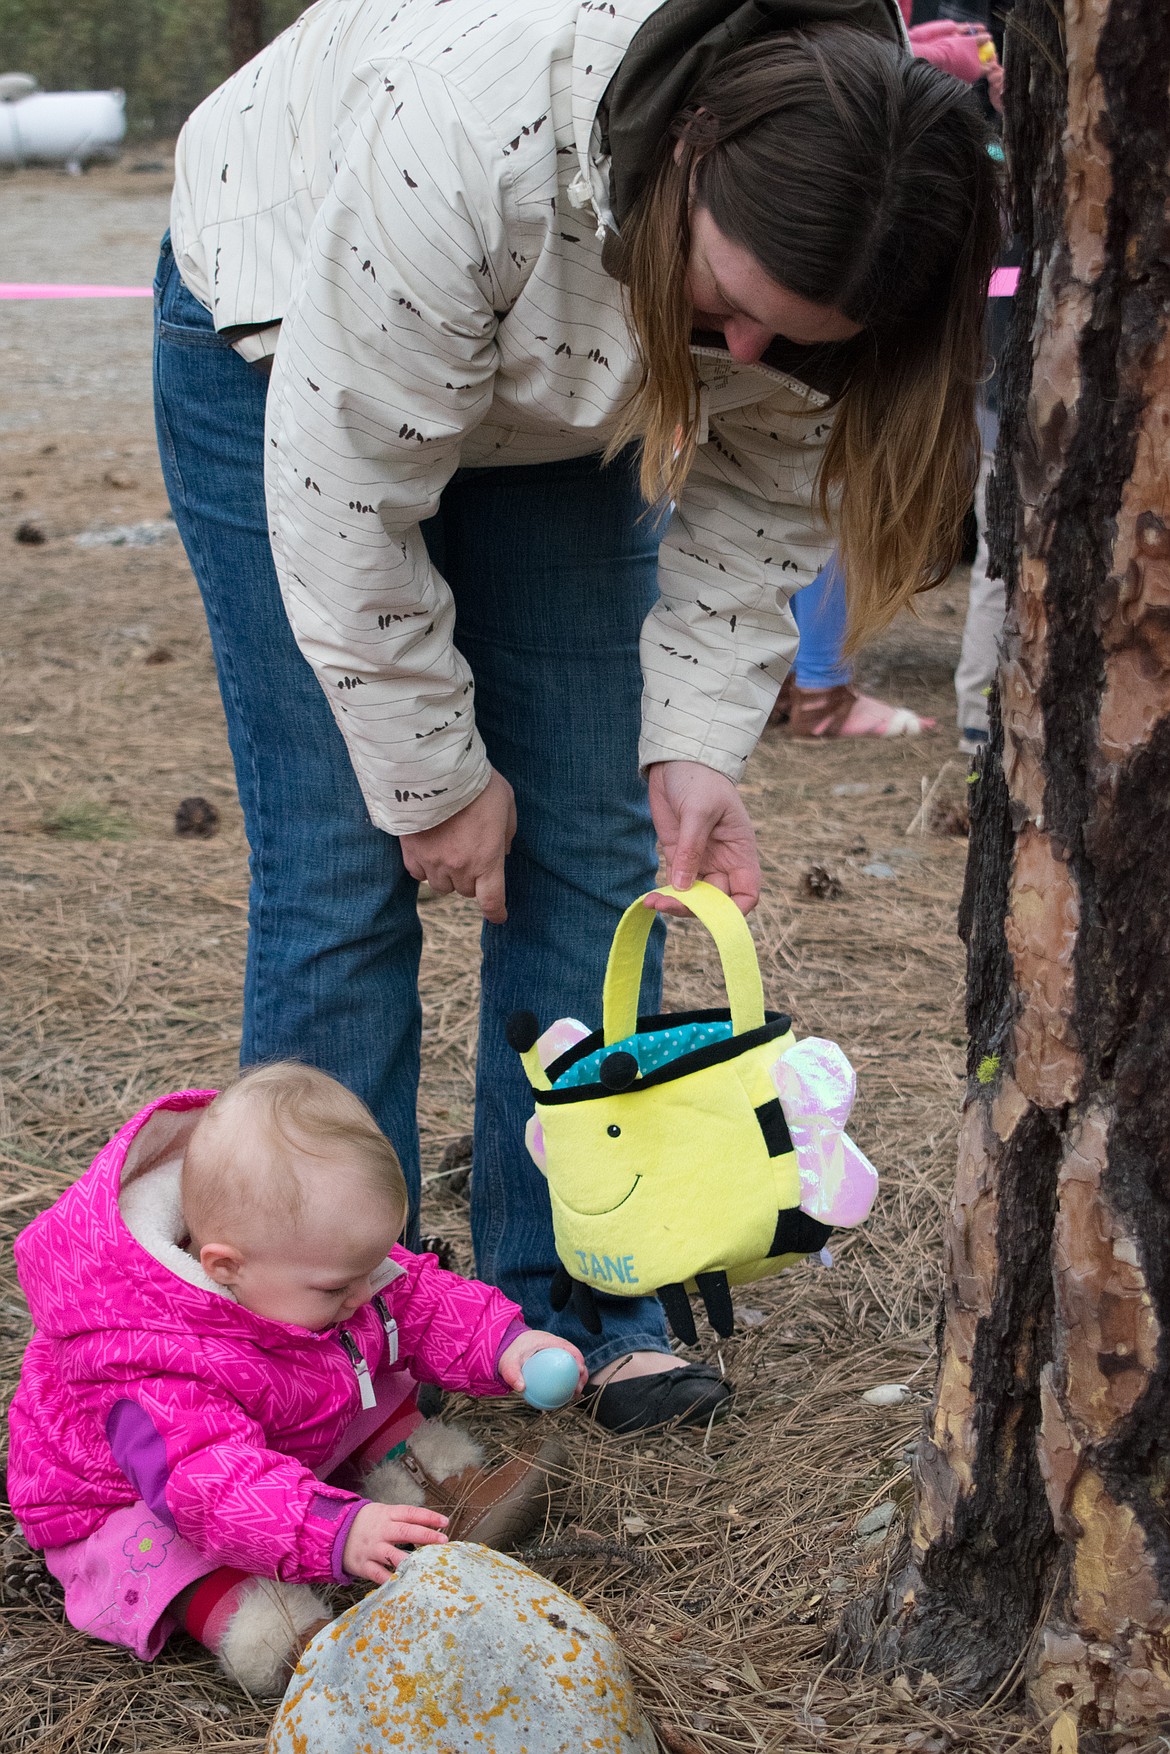 One year old Jane Grossman lost her balance while gathering Easter eggs at Libby Christian Church, but kept going with the help of her mother Cassie, March 31. (Ben Kibbey/The Western News)